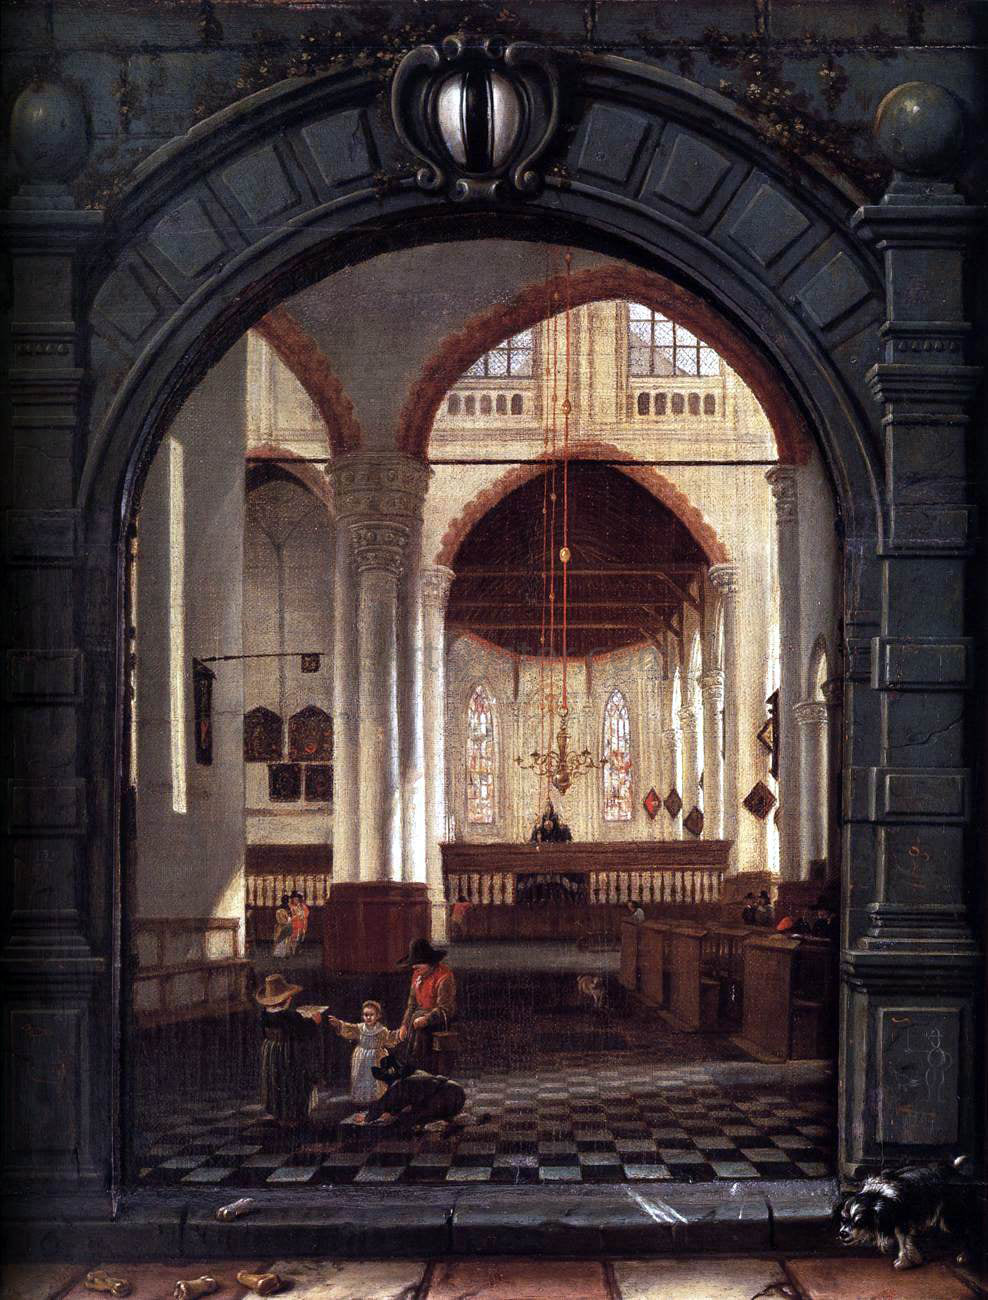  Louys Aernoutsz Elsevier Interior of the Oude Kerk, Delft, Seen Through a Stone Archway - Hand Painted Oil Painting